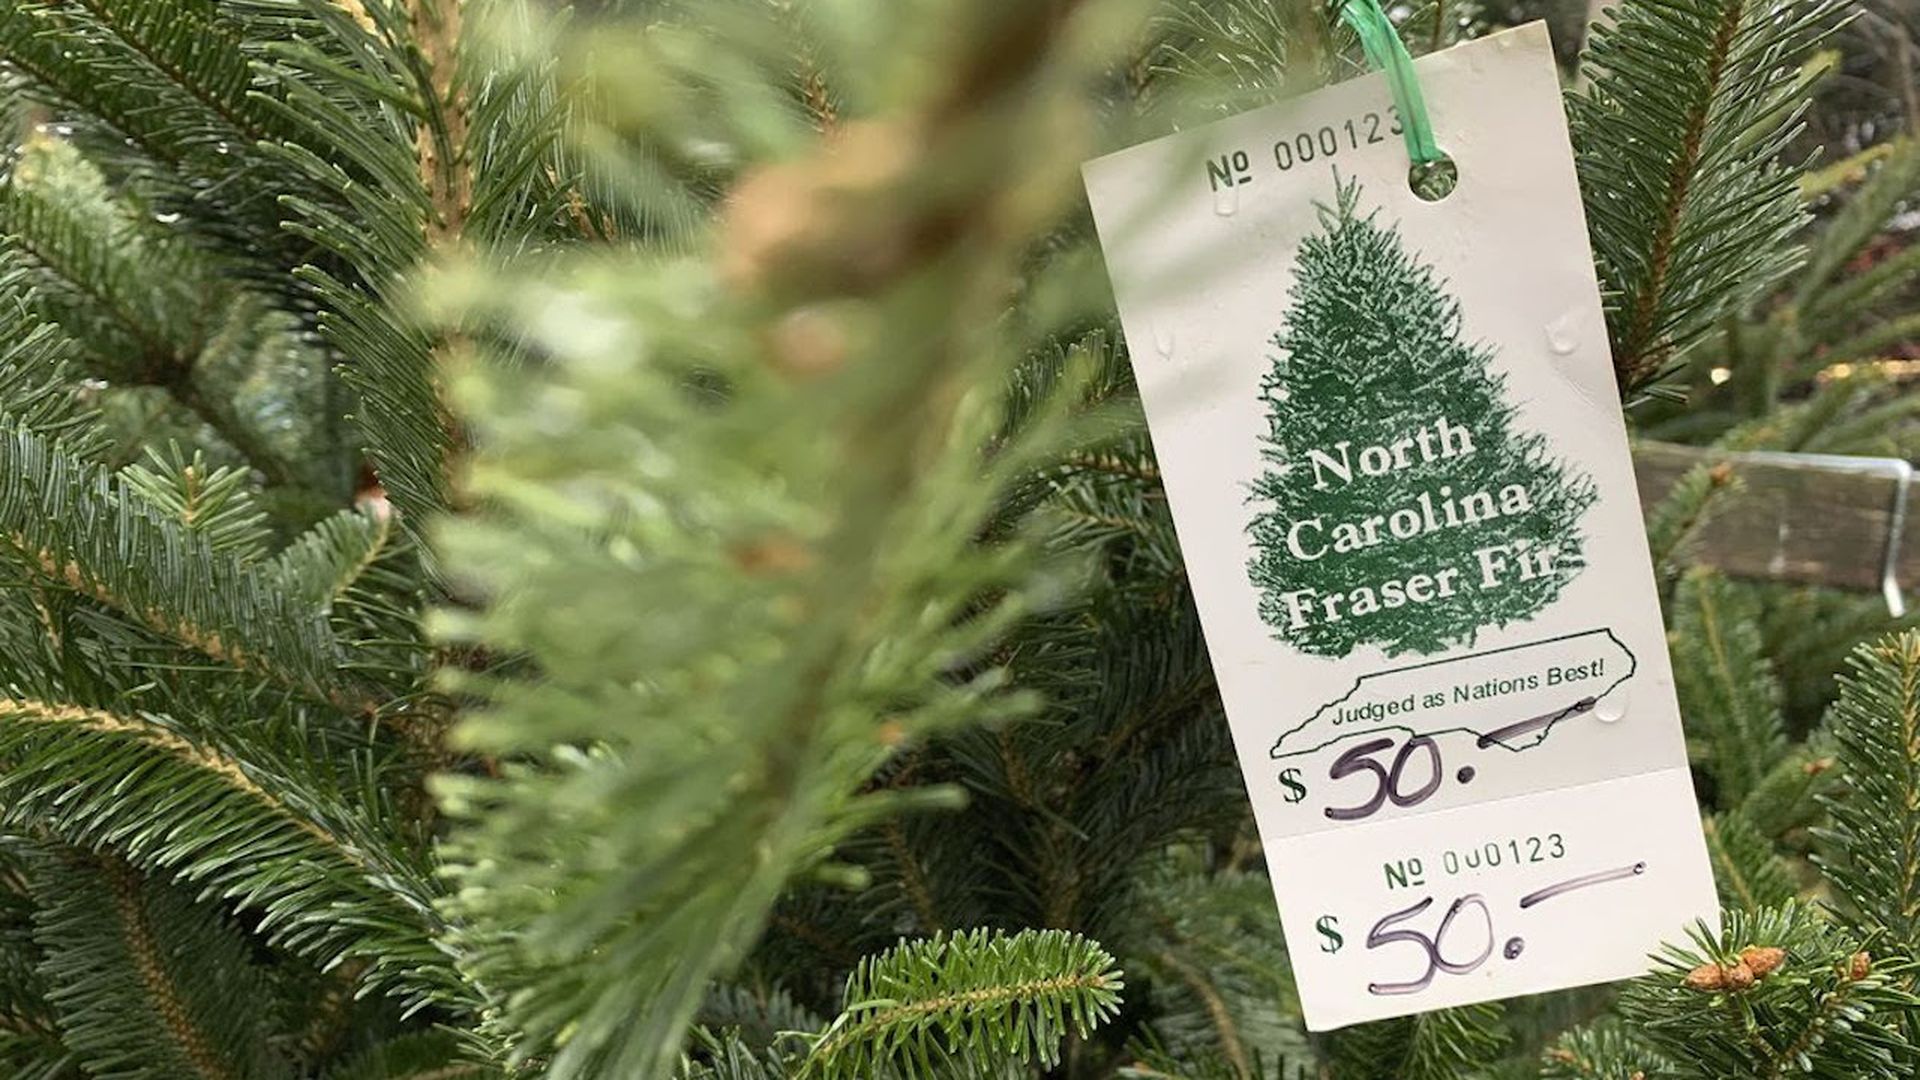 Tight supply is driving a rise in Christmas tree prices